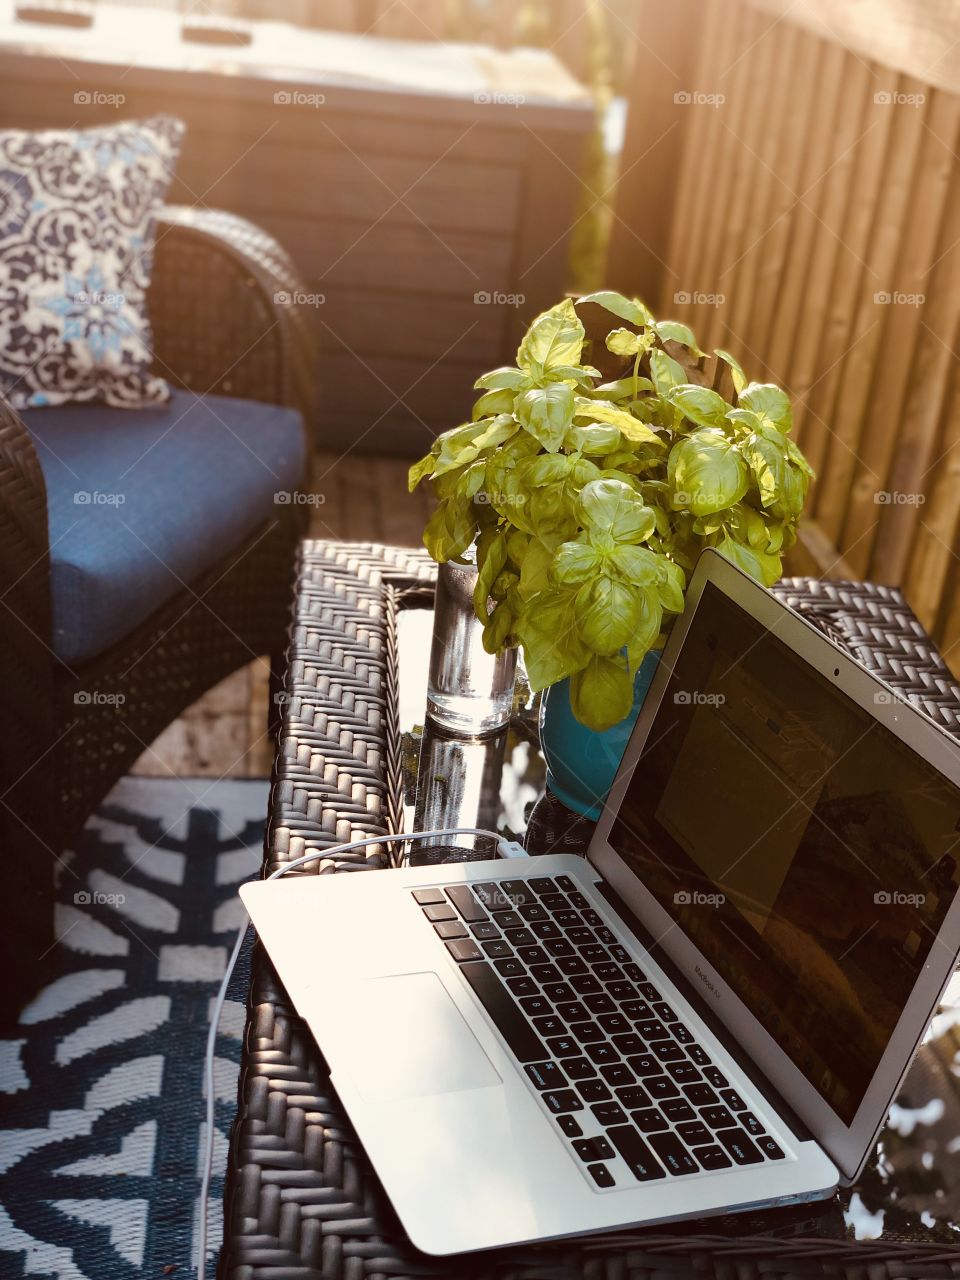 Sometimes we all need our own space...our space to create. This is mine. In this space, I can write. In this space, I can breathe. In this space, I am free. 